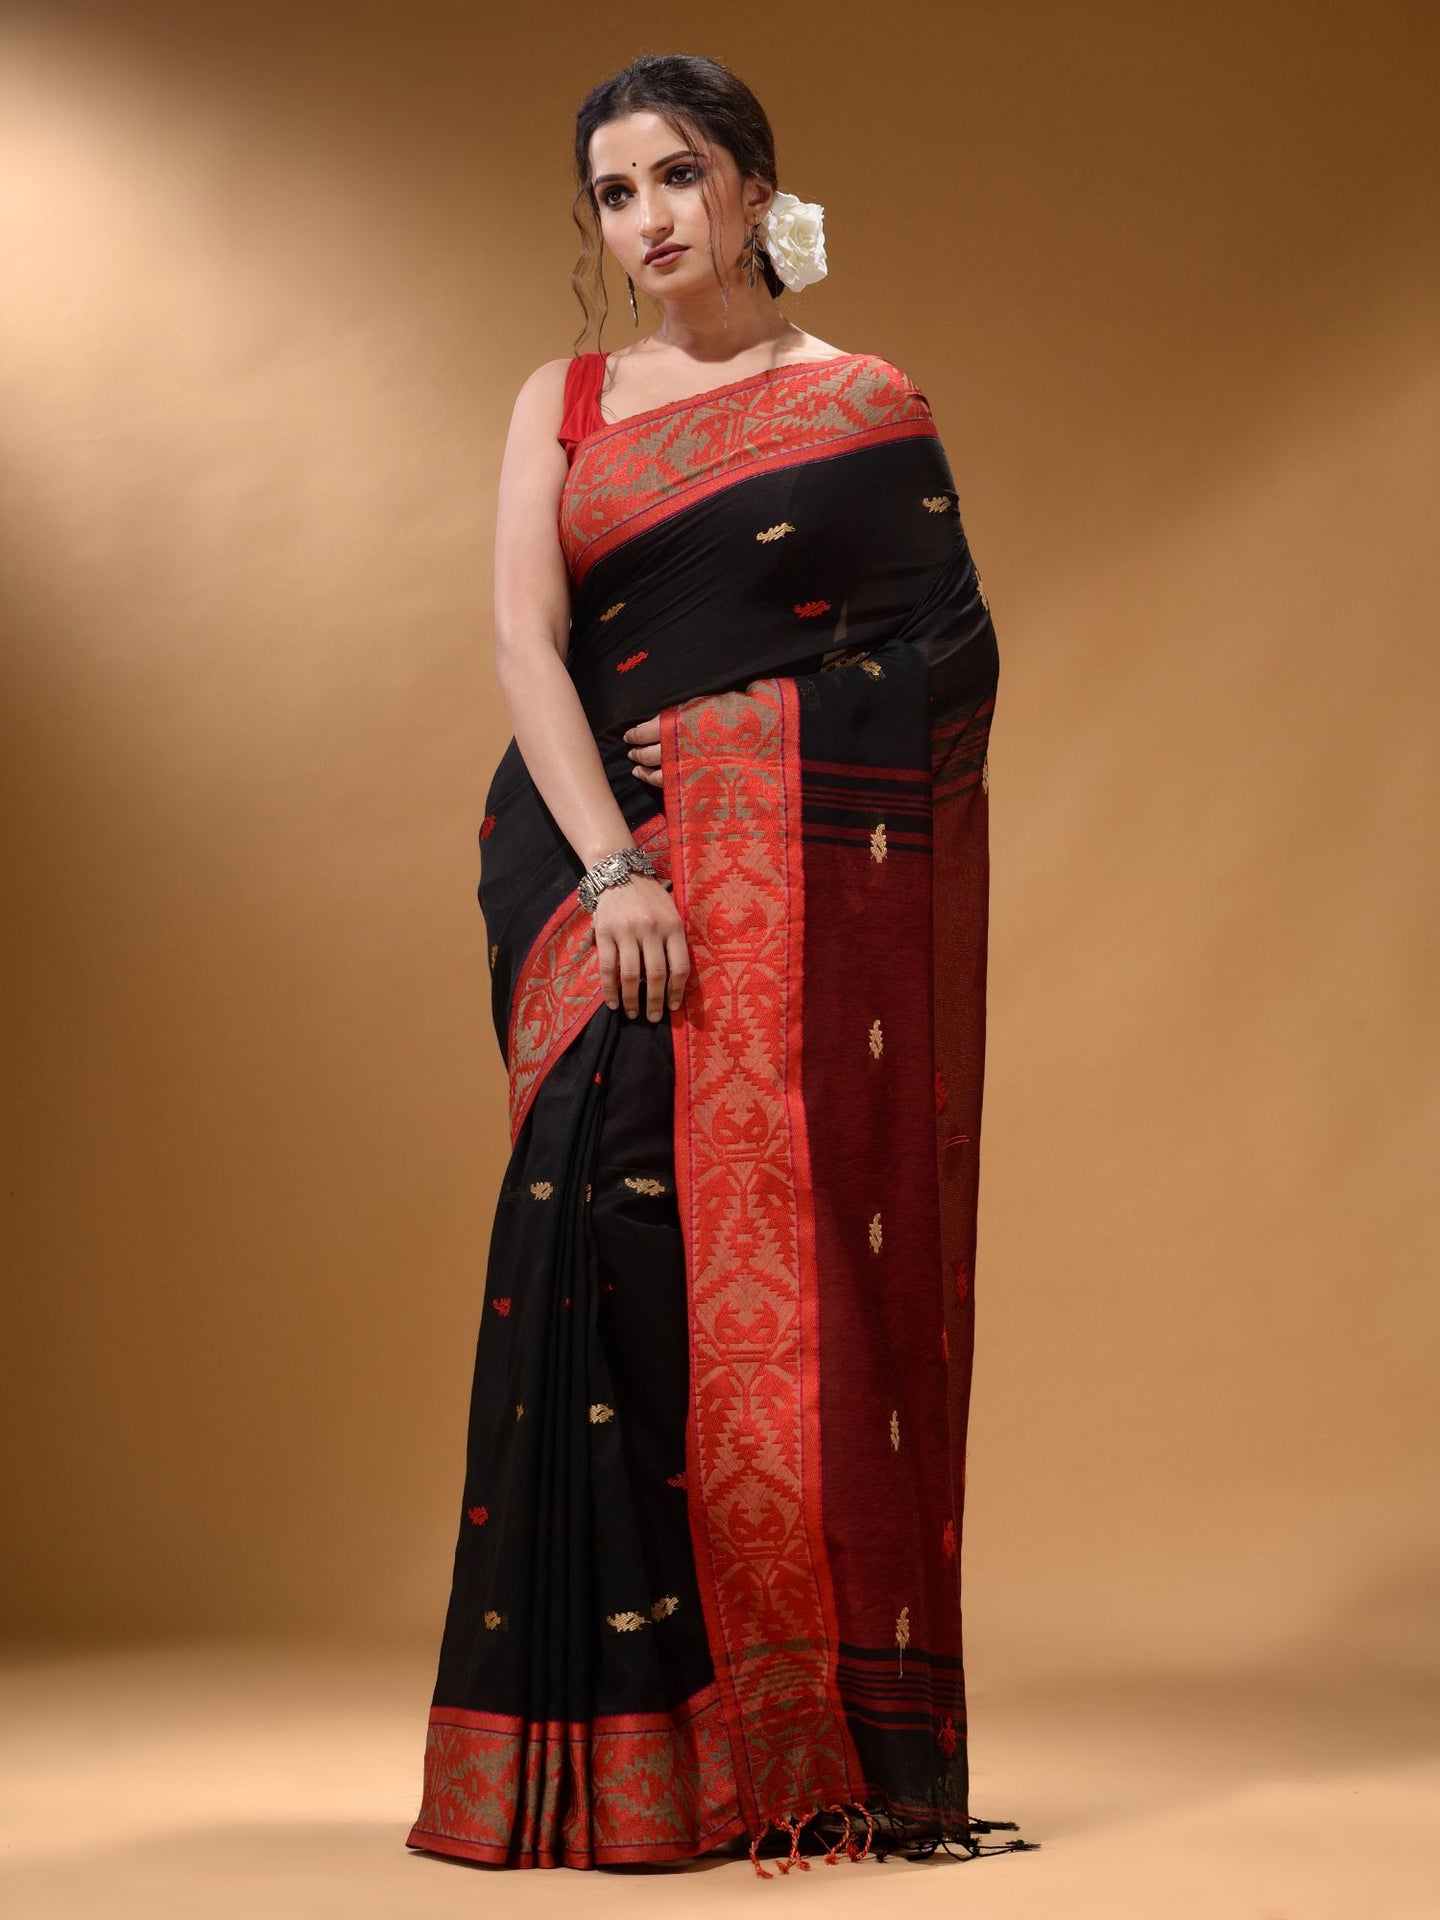 Black Cotton Handspun Soft Saree With Nakshi Border And Contrast With Red Pallu